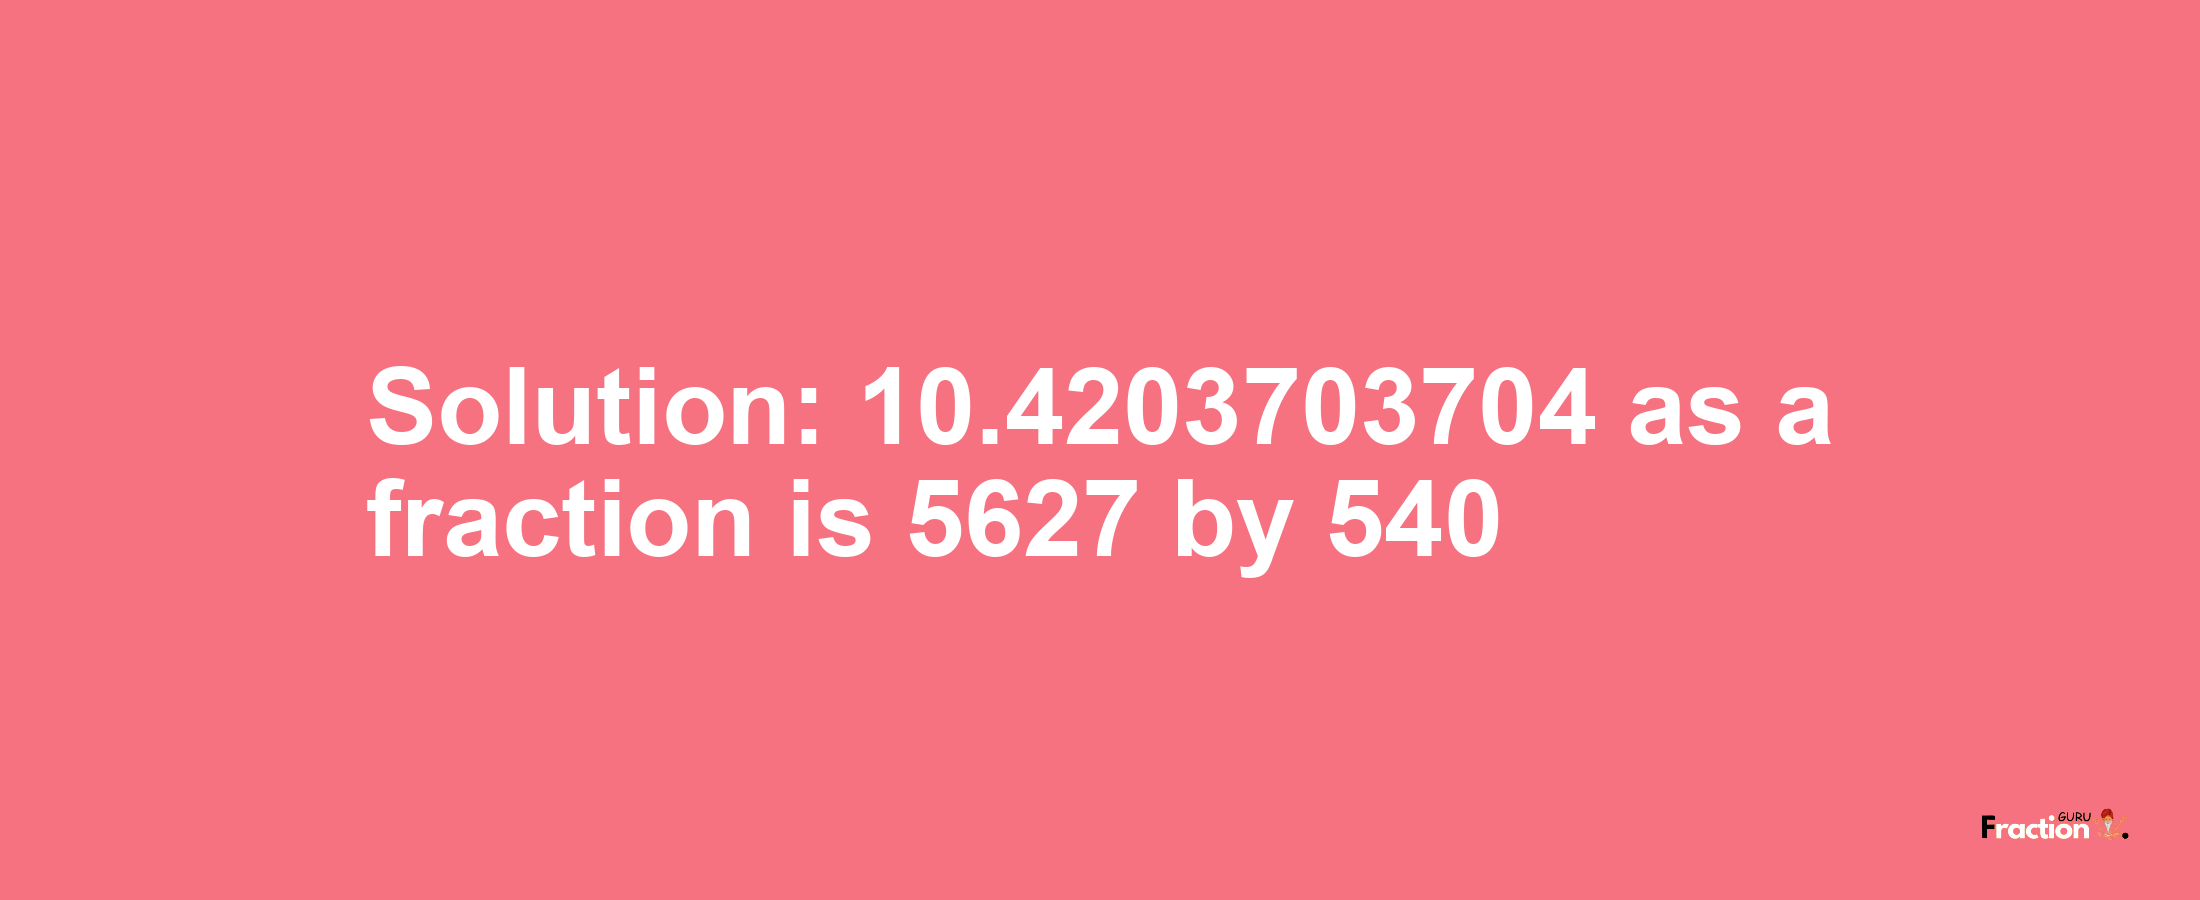 Solution:10.4203703704 as a fraction is 5627/540